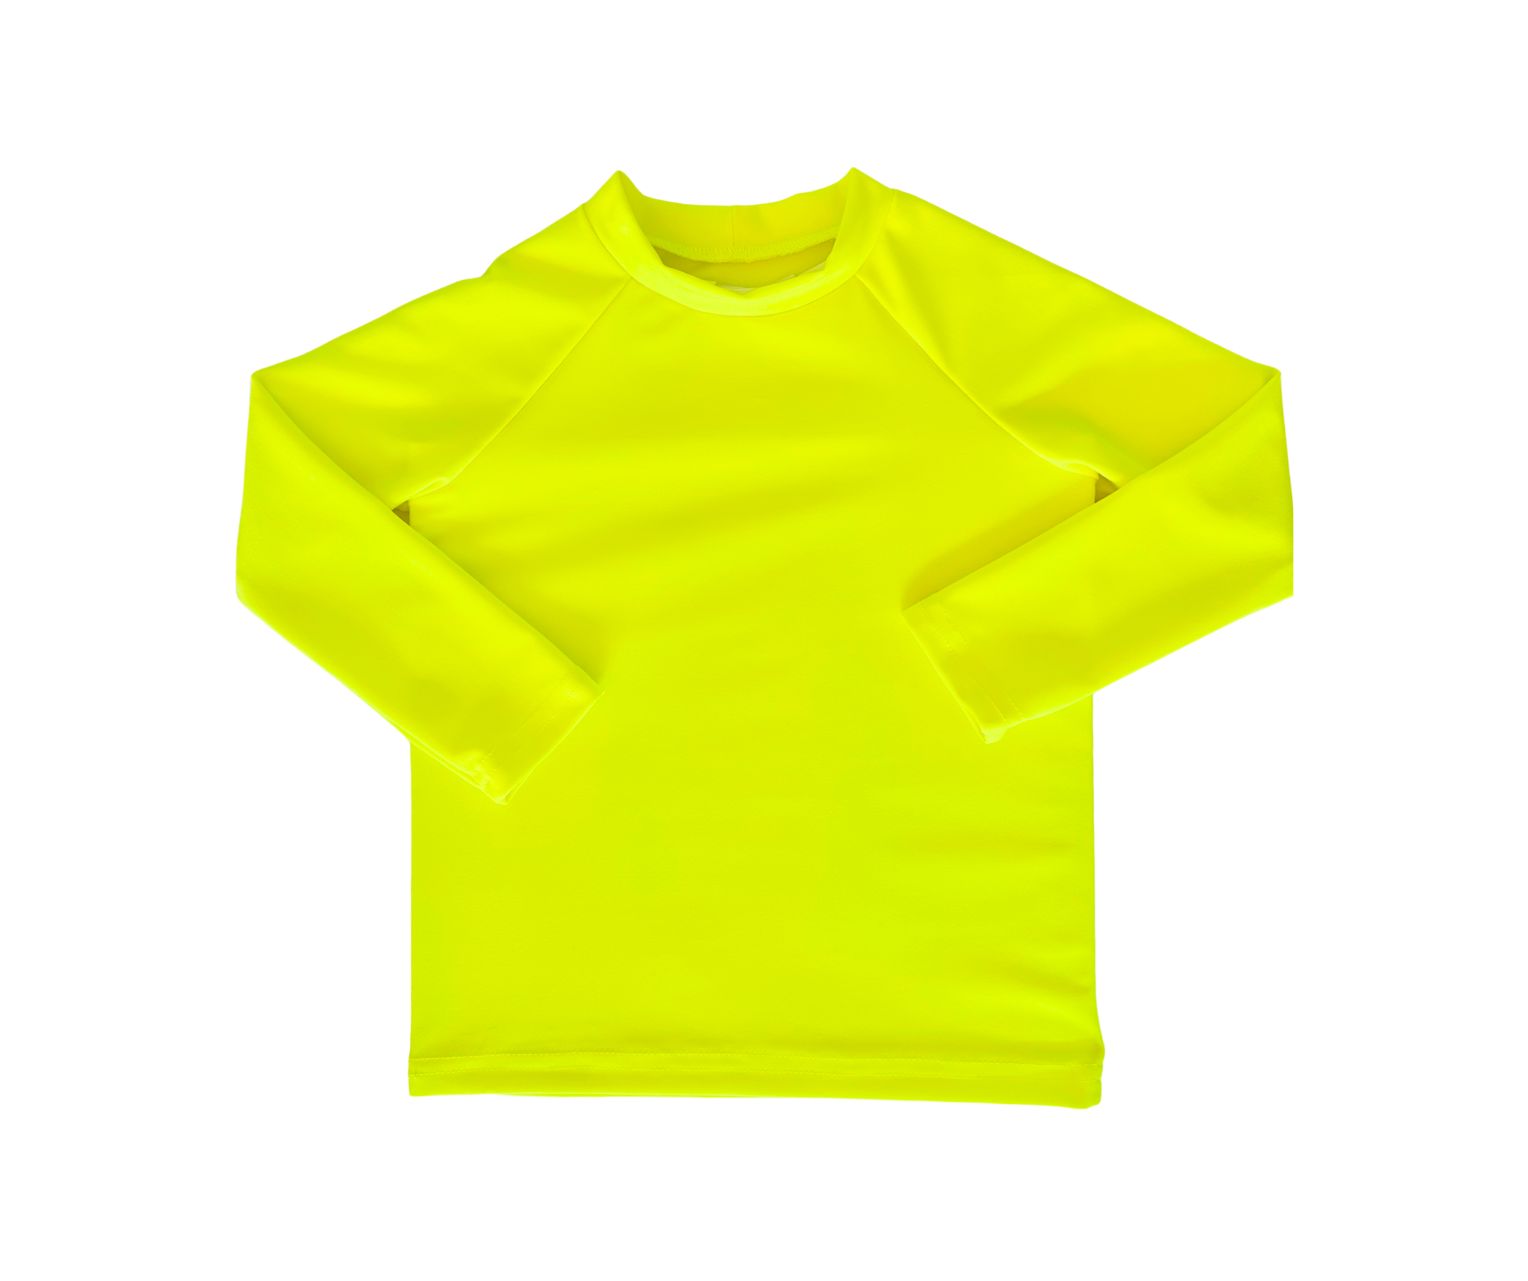 A single product image of a neon yellow rash guard long-sleeved. 